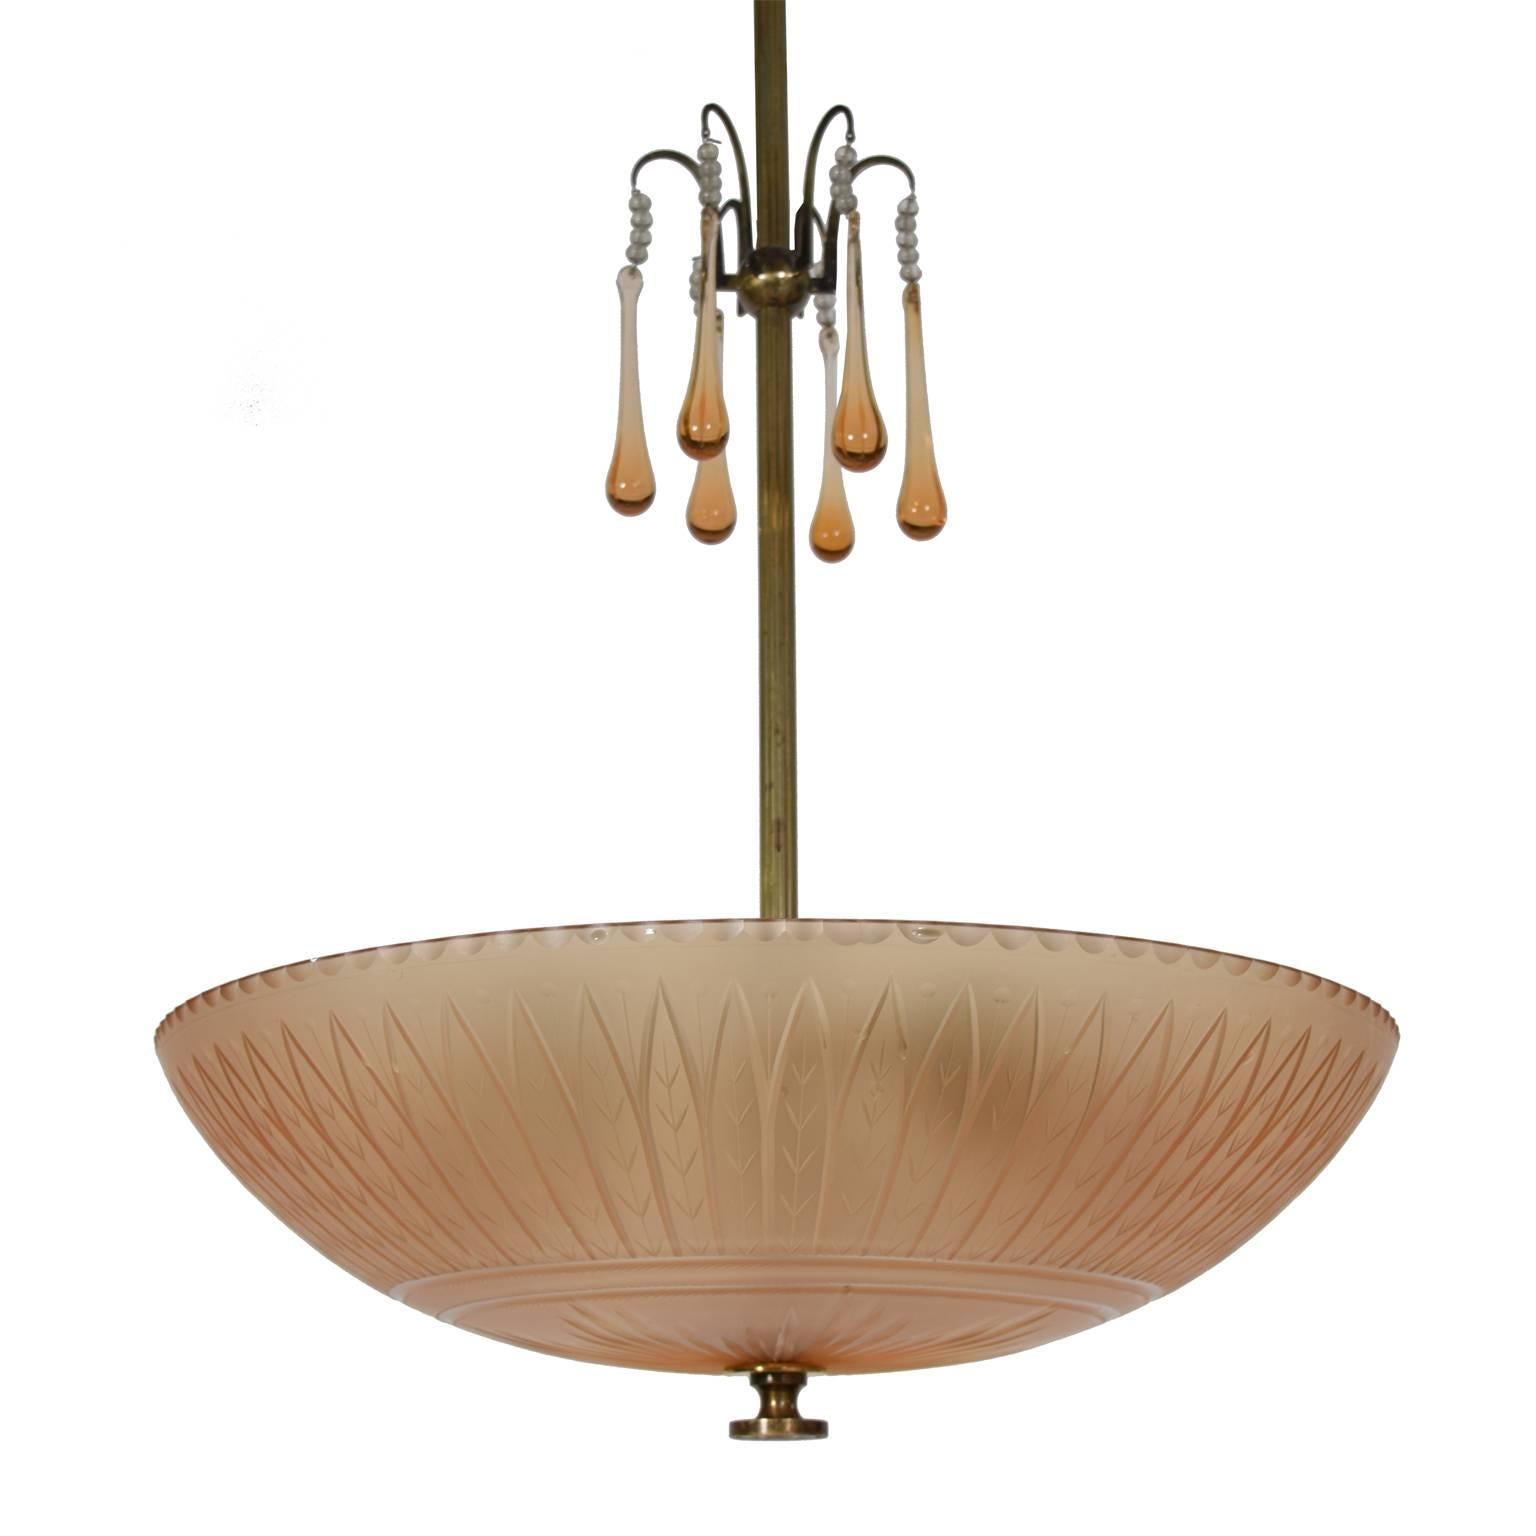 Cut and polished satin shade in rio brown glass. Oxidized brass fittings and six drop glass ornaments.